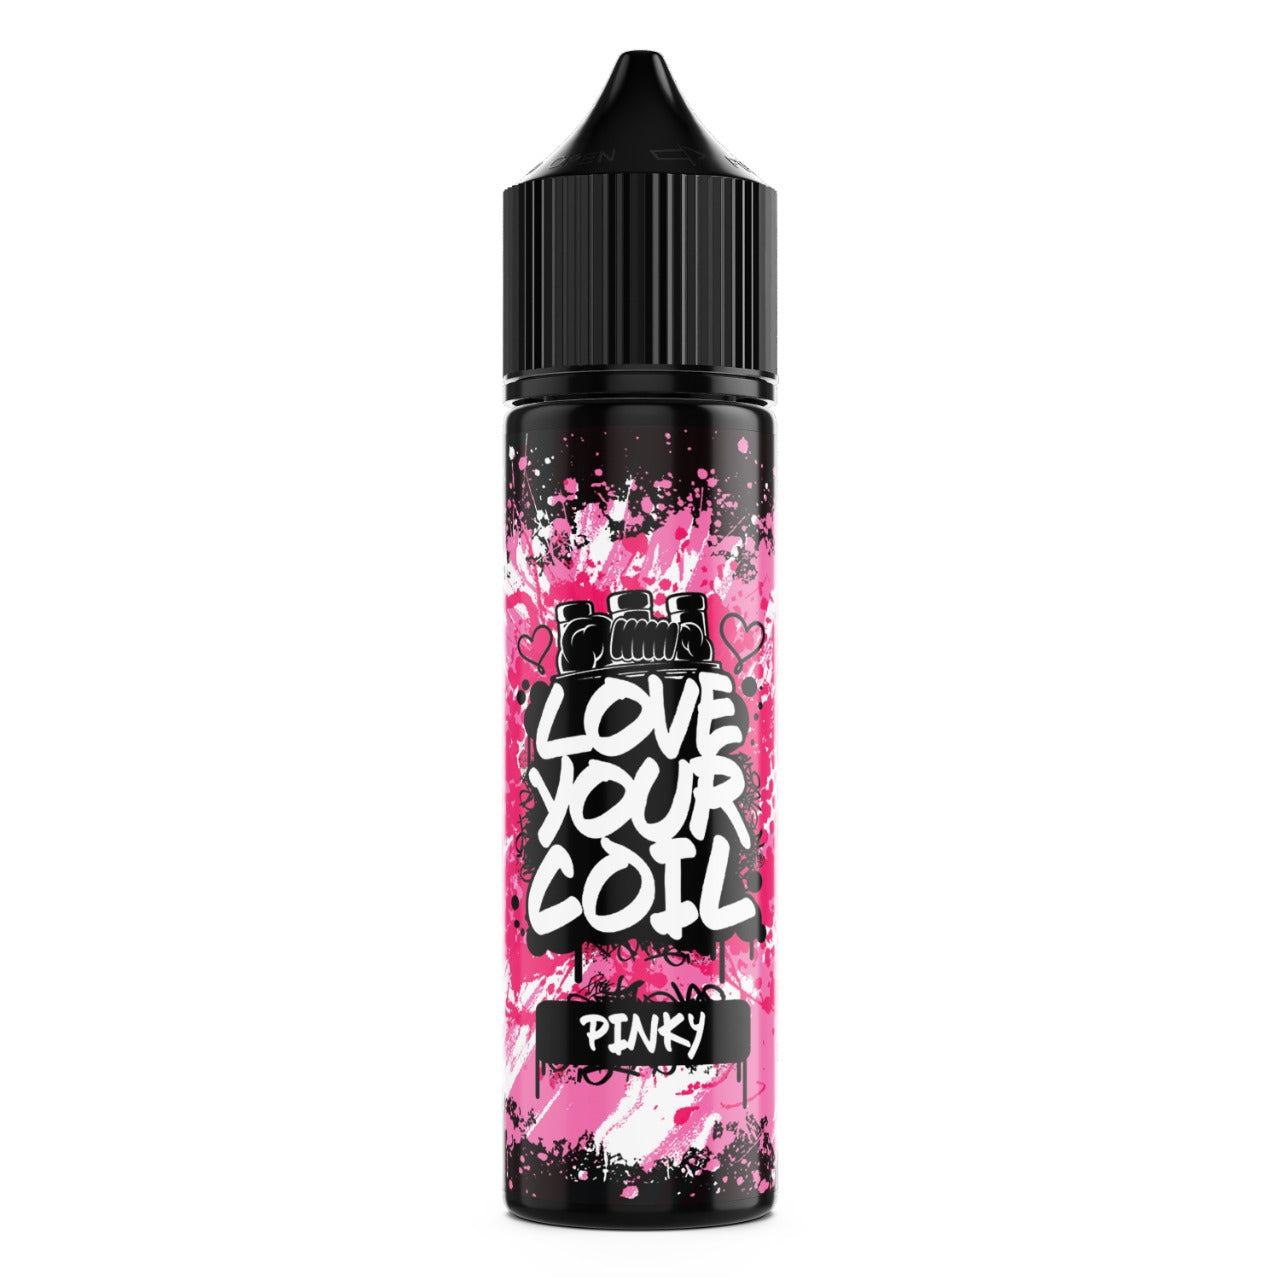 Pinky 50ml Shortfill E Liquid By Love Your Coil (LYC)